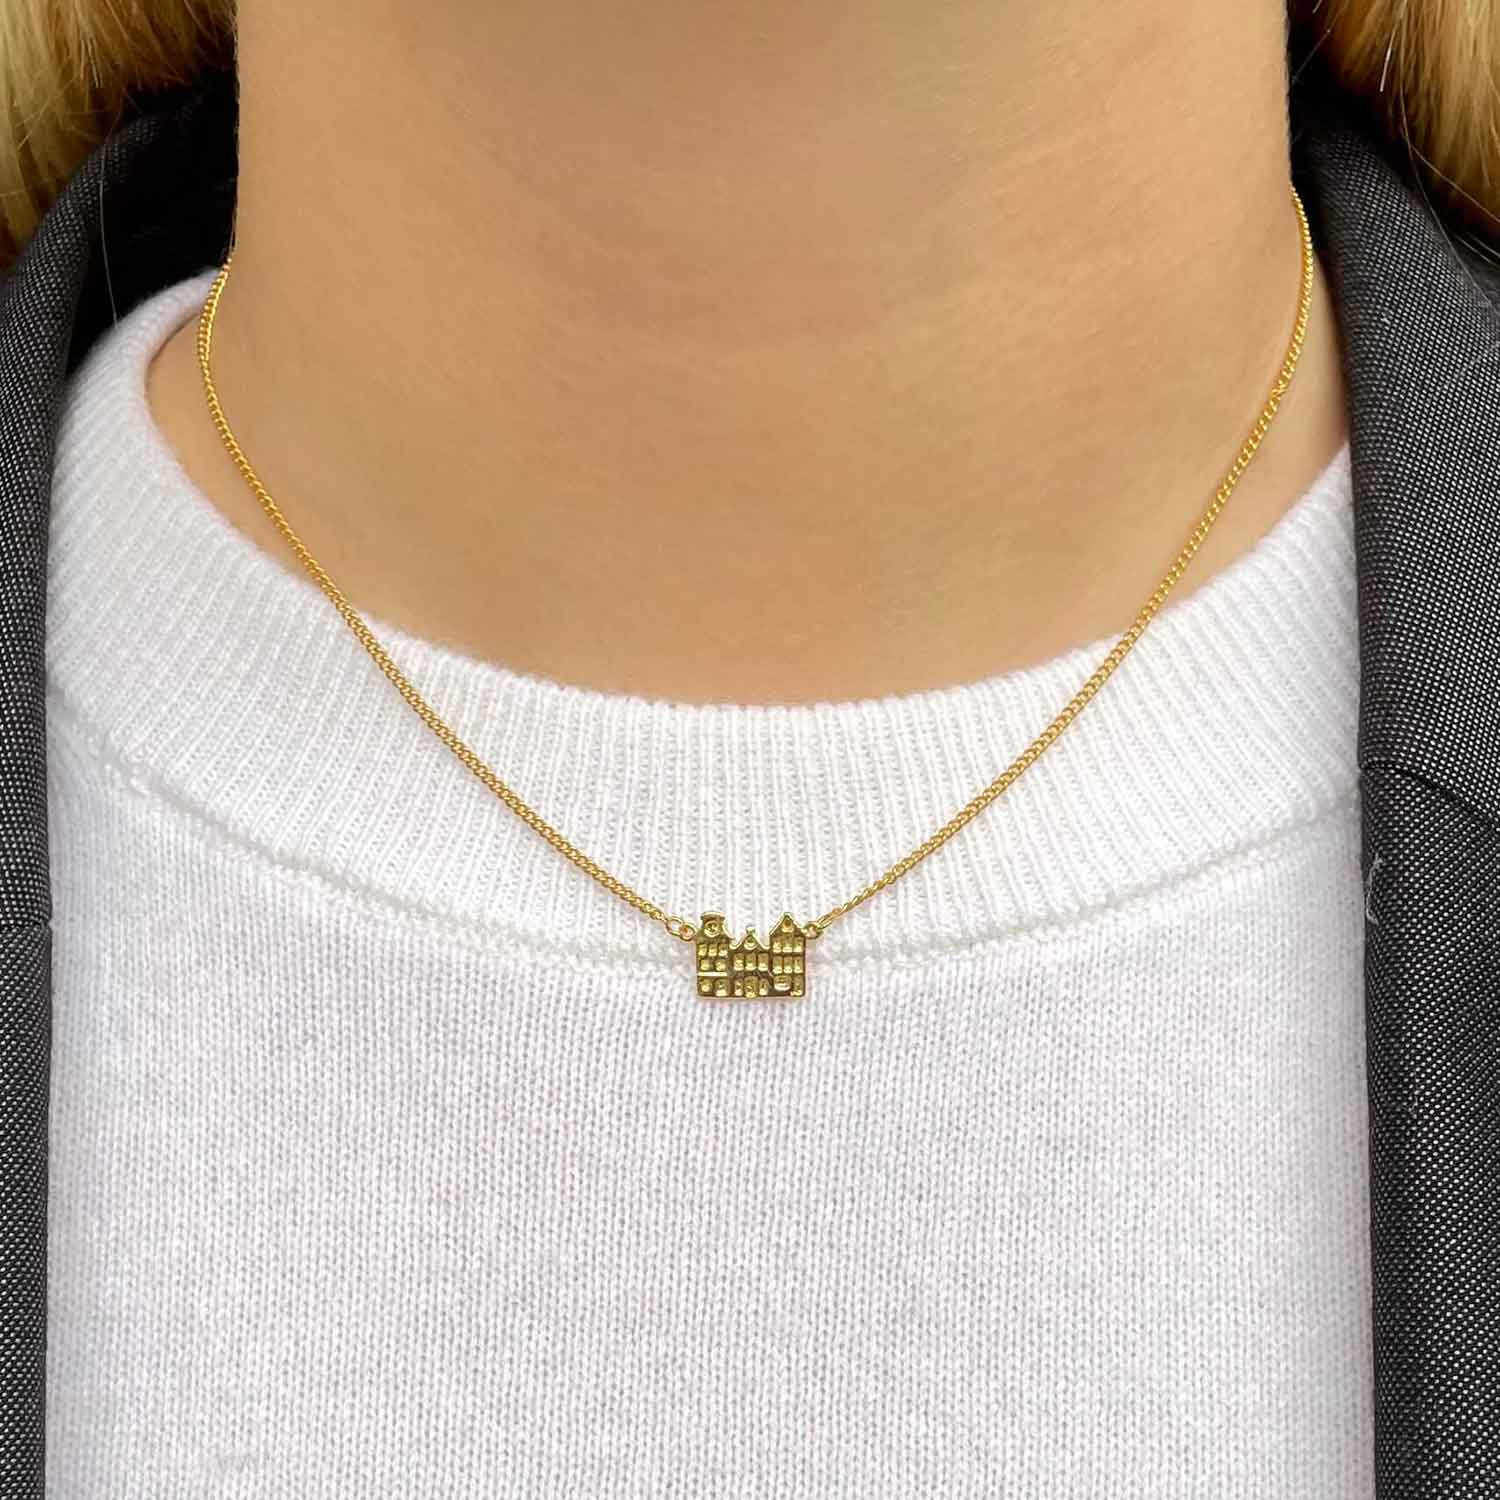 Amsterdam Canal House Gold Plated Necklace